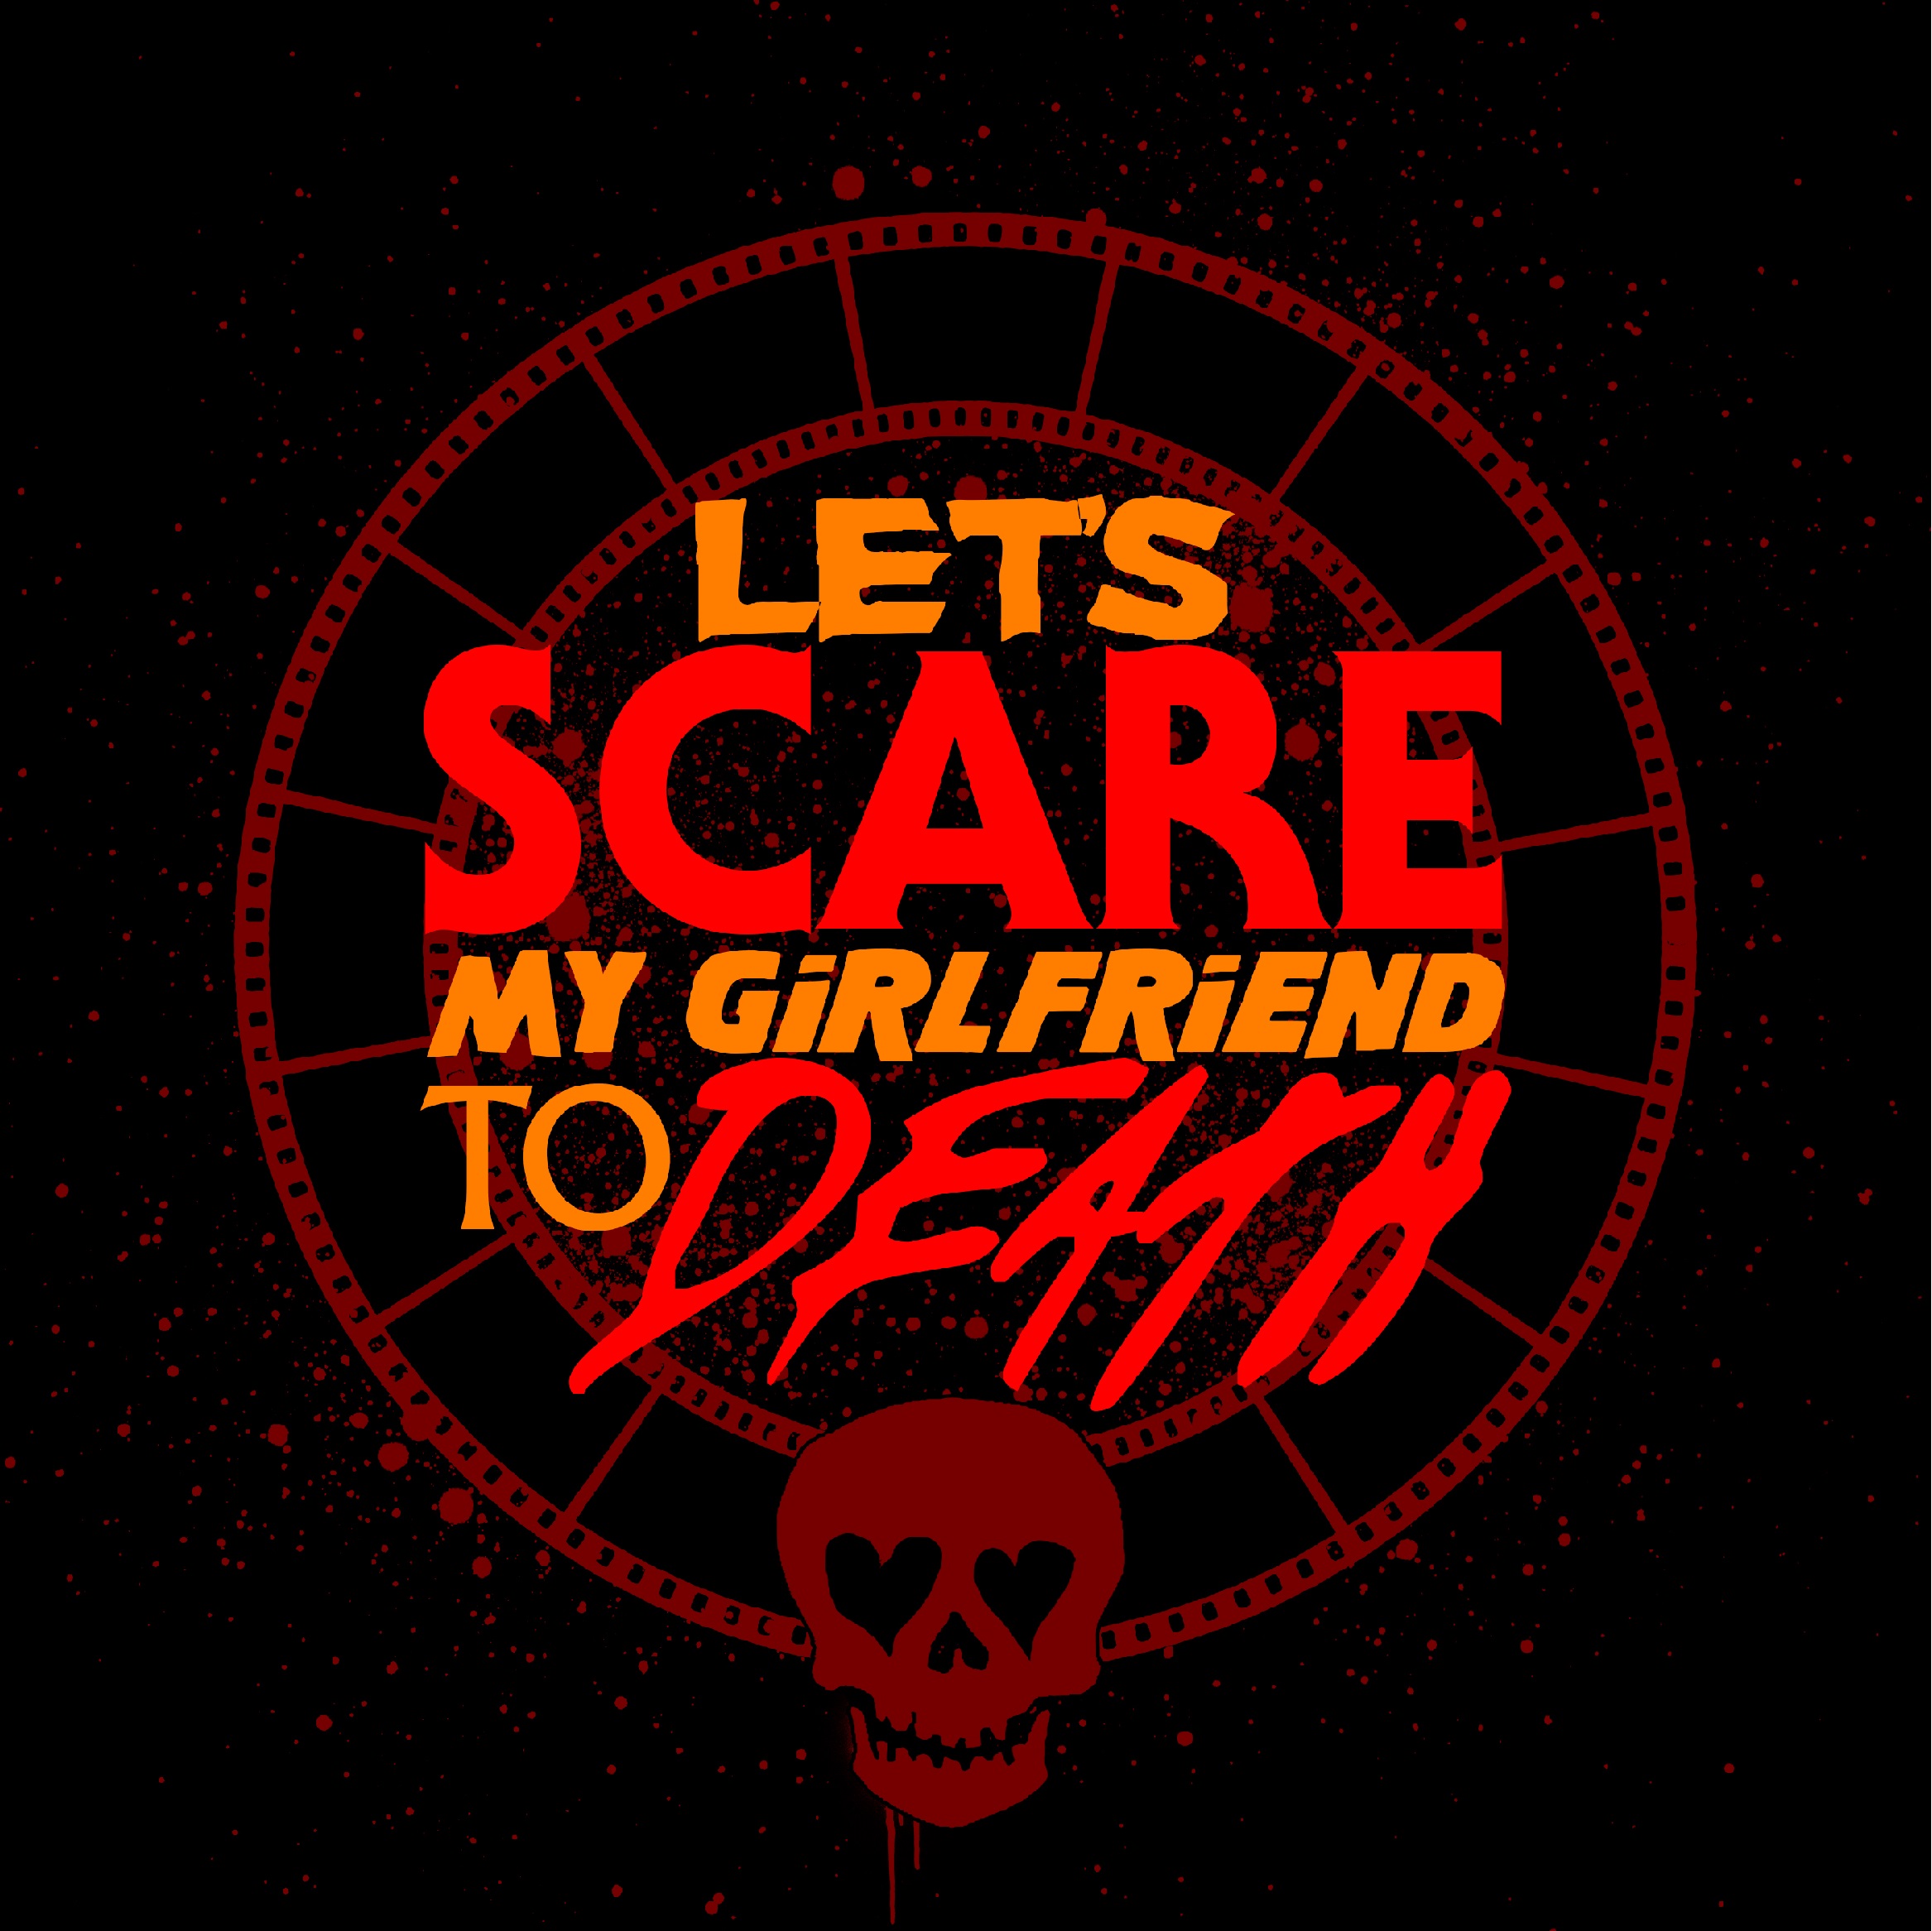 Let's Scare My Girlfriend to Death